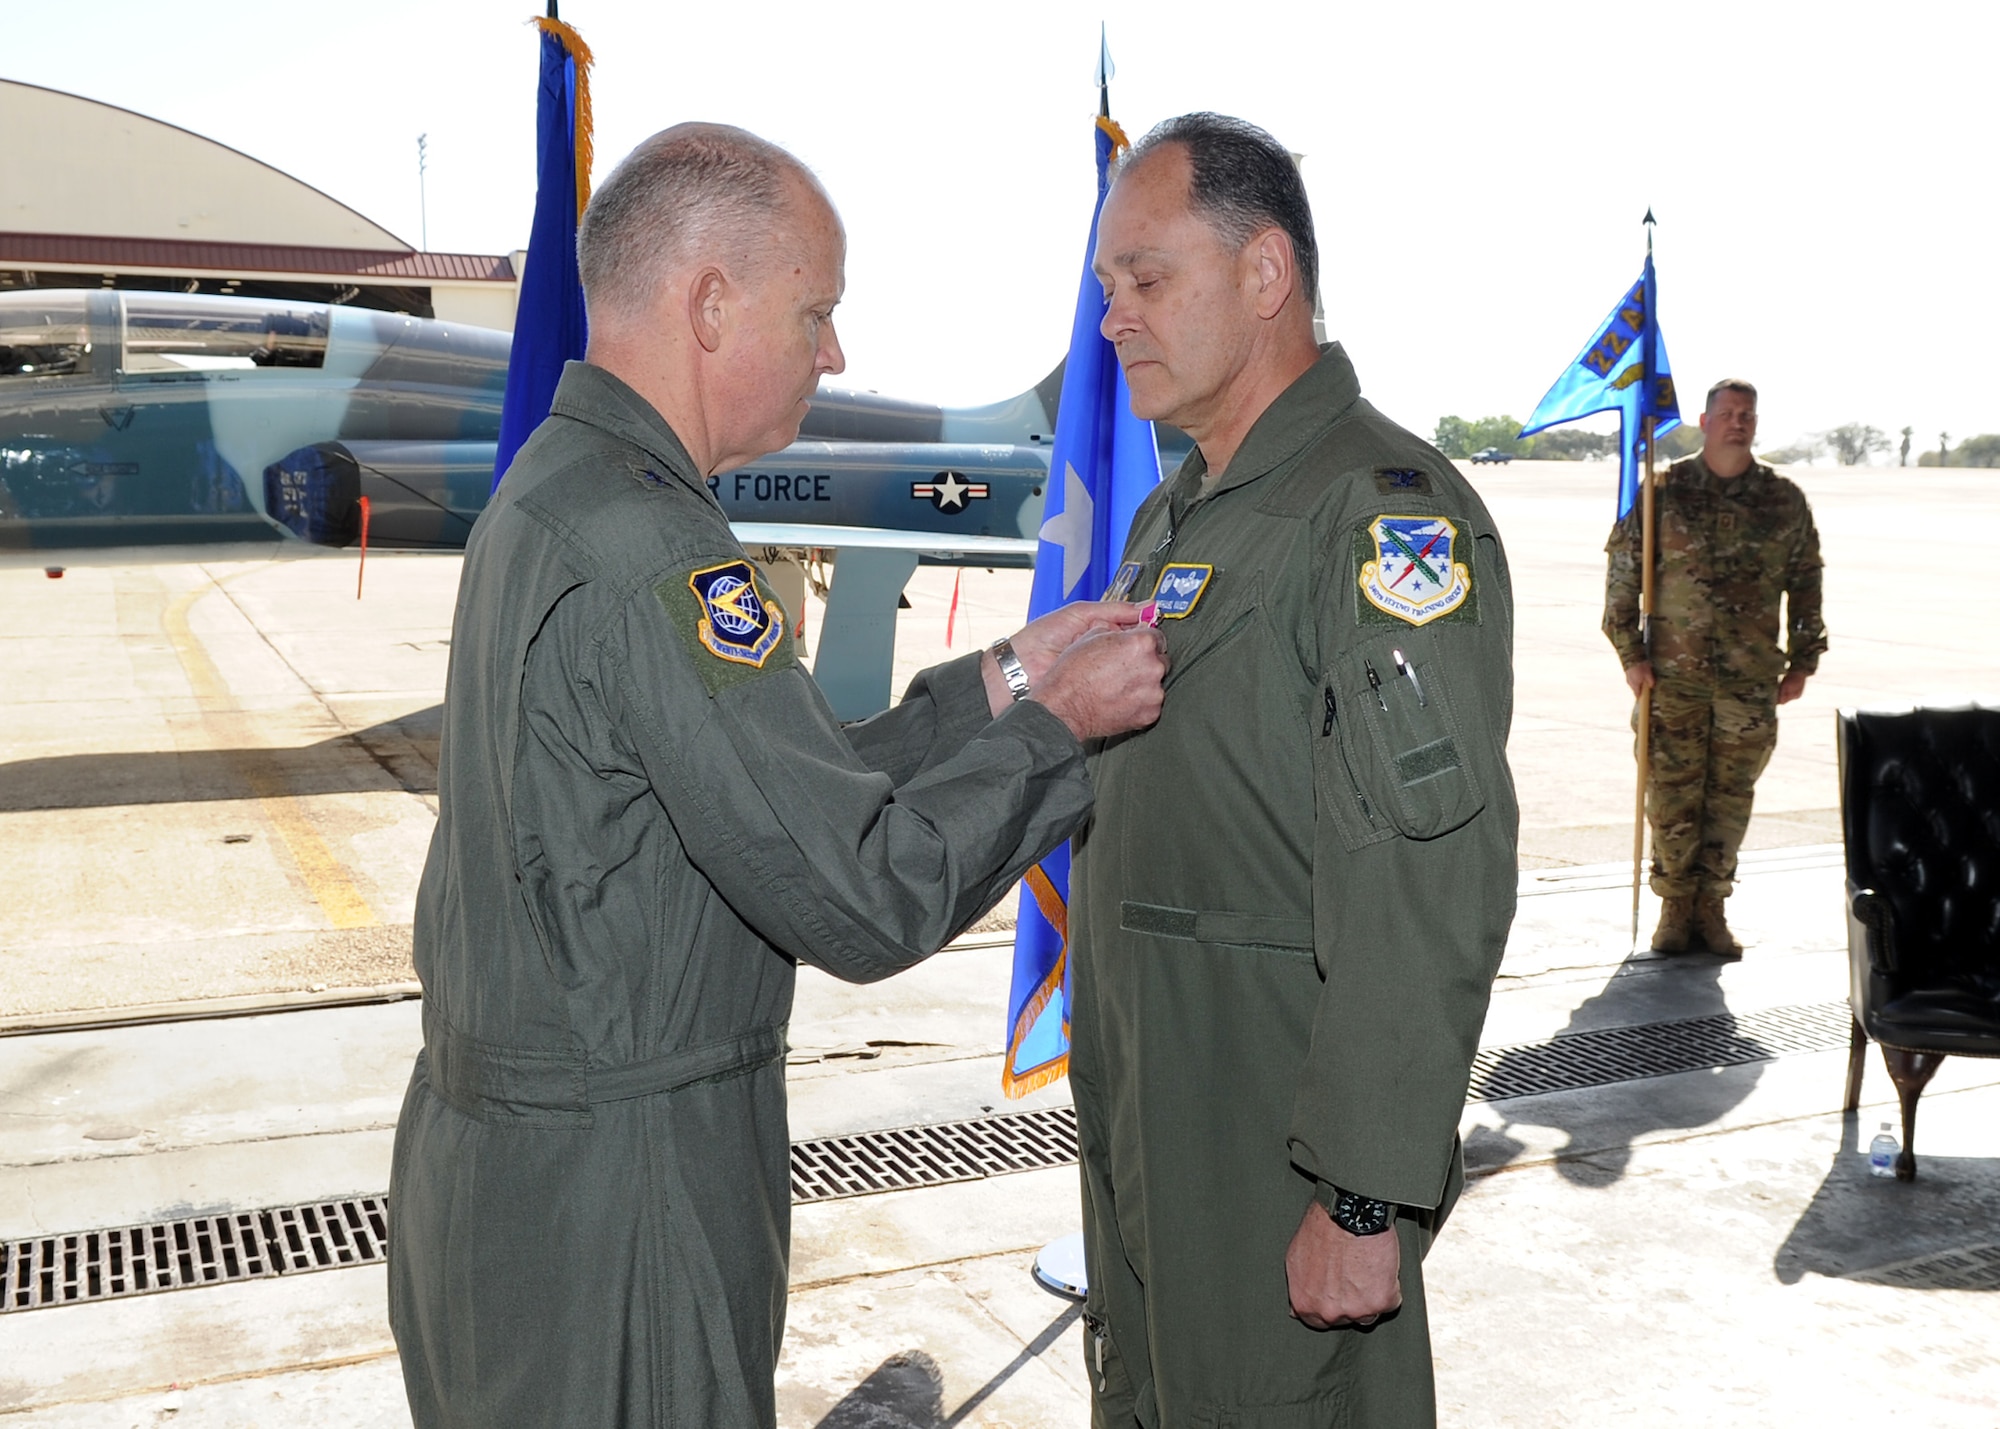 Maj. Gen. Bret C. Larson, 22nd Air Force commander, presents the U.S. Department of Defense’s Legion of Merit to Col. Michael Vanzo, 340th Flying Training Group outgoing commander, during an official change of command ceremony conducted at Joint Base San Antonio-Randolph, Texas, on Mar. 31, 2022.